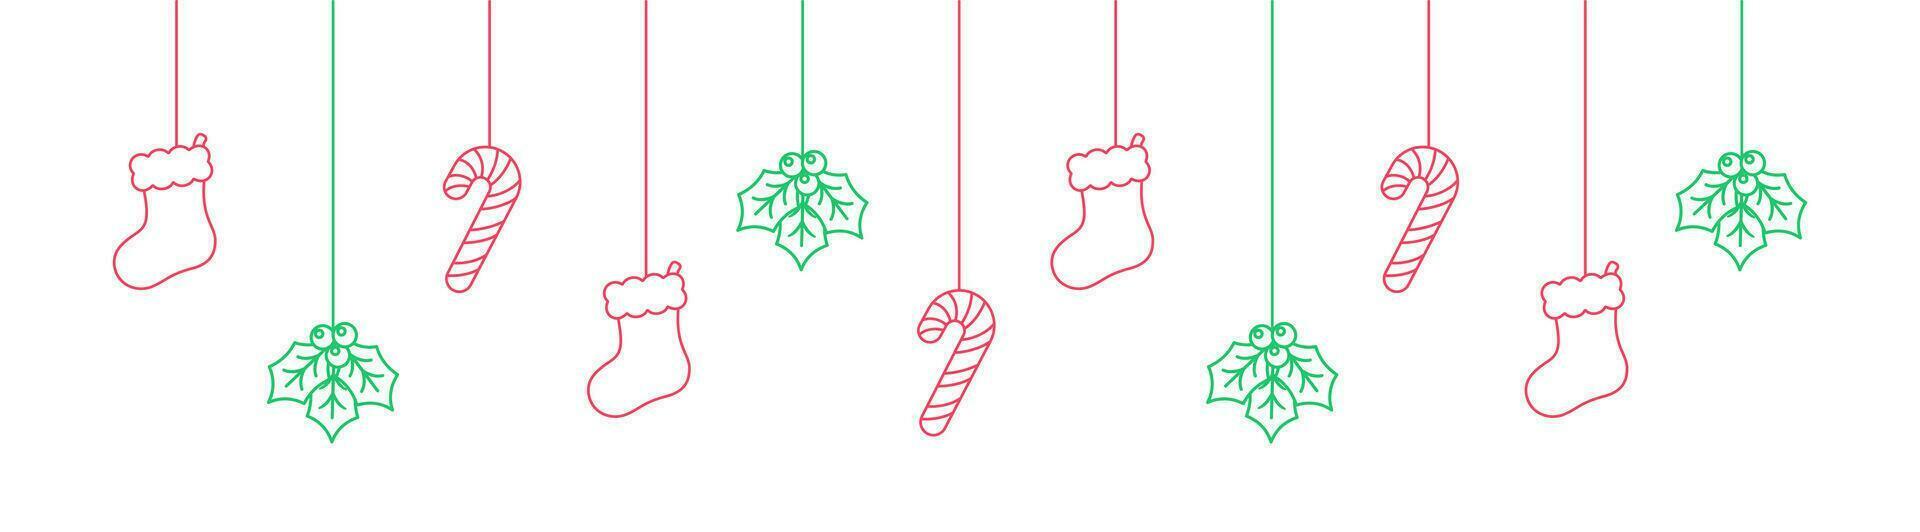 Merry Christmas Border Banner Line Art Doodle, Hanging Stocking, Mistletoe and Candy Cane Garland. Winter Holiday Season Header. Web Banner Template. Vector illustration.